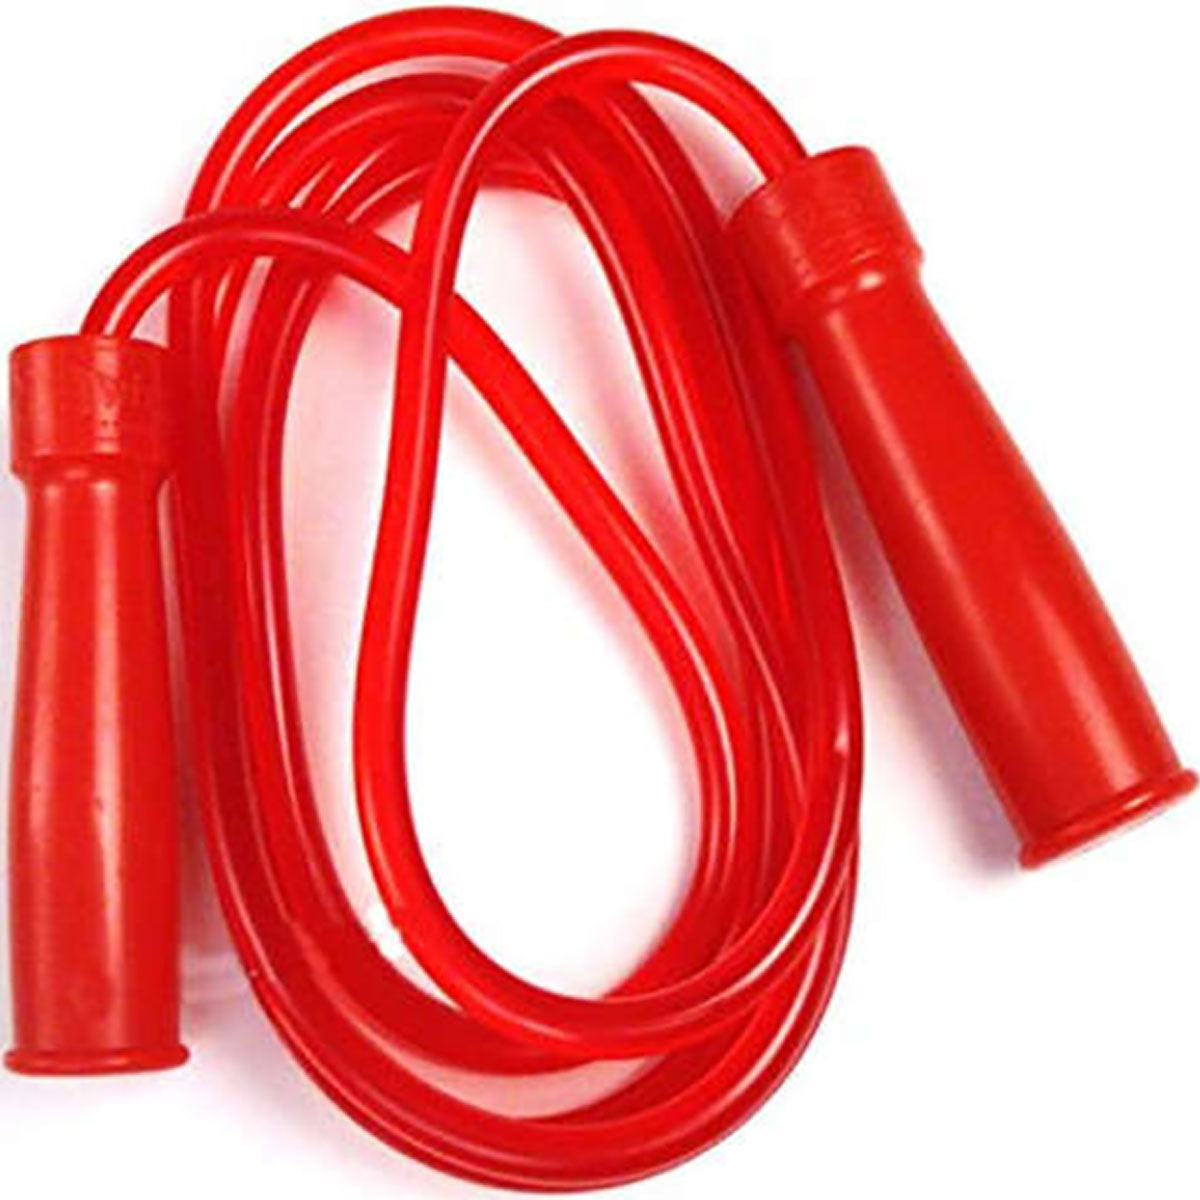 Skipping Rope SR-2 Twins Special for Muay Thai Fitness Boxing MMA